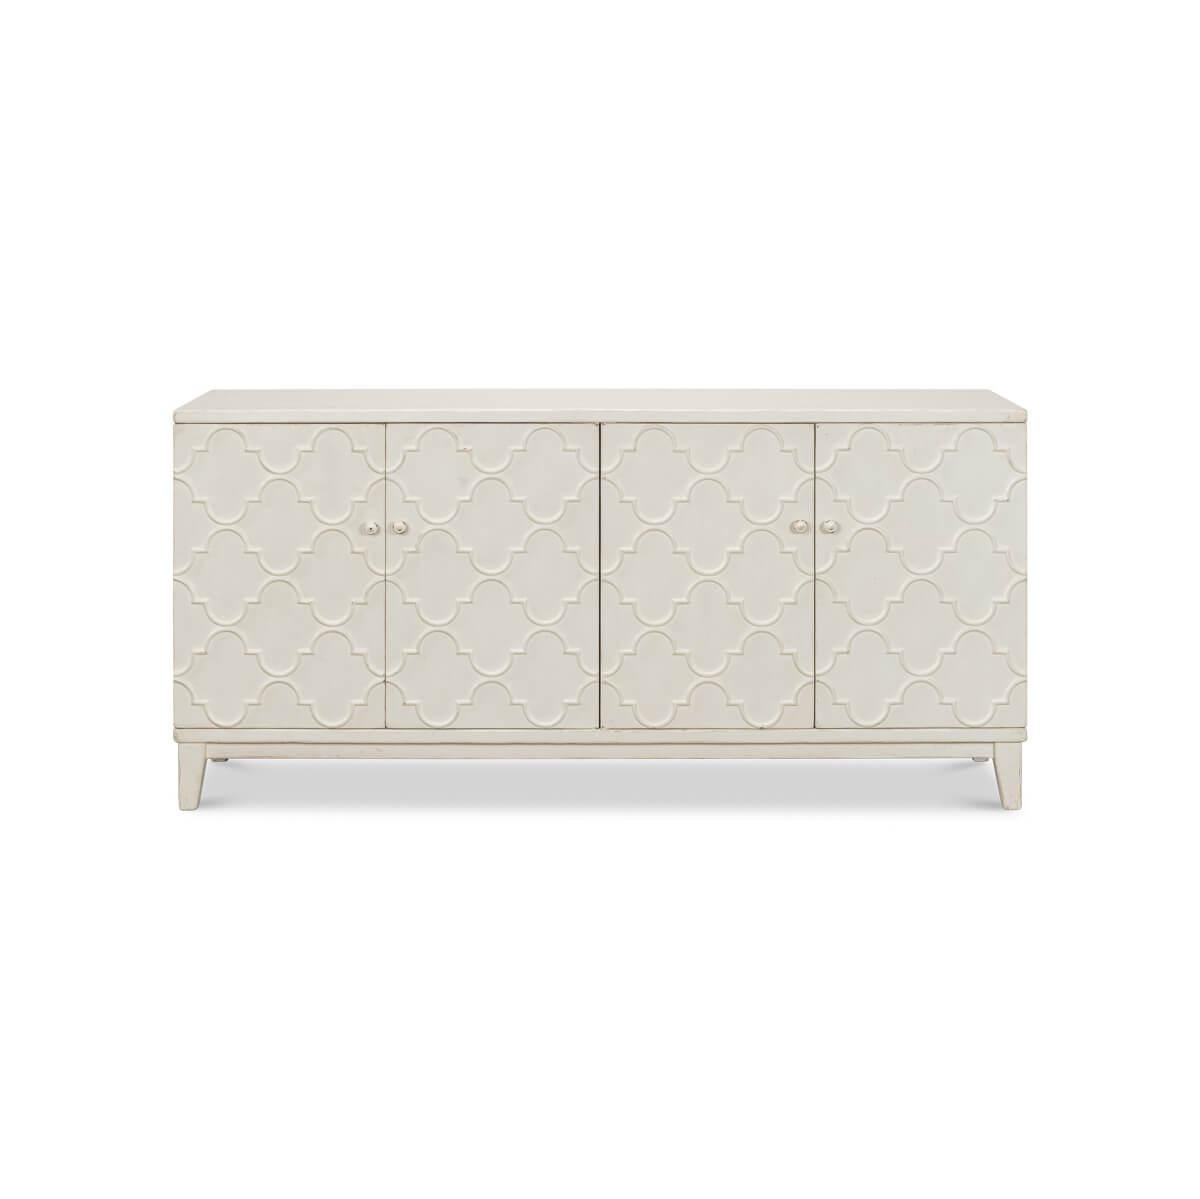 This exquisite piece boasts a tranquil white finish, gently distressed to reveal undertones of natural wood for a perfectly aged look. The front fascia is adorned with arabesque mosaic patterns, creating a captivating visual. Behind the four doors